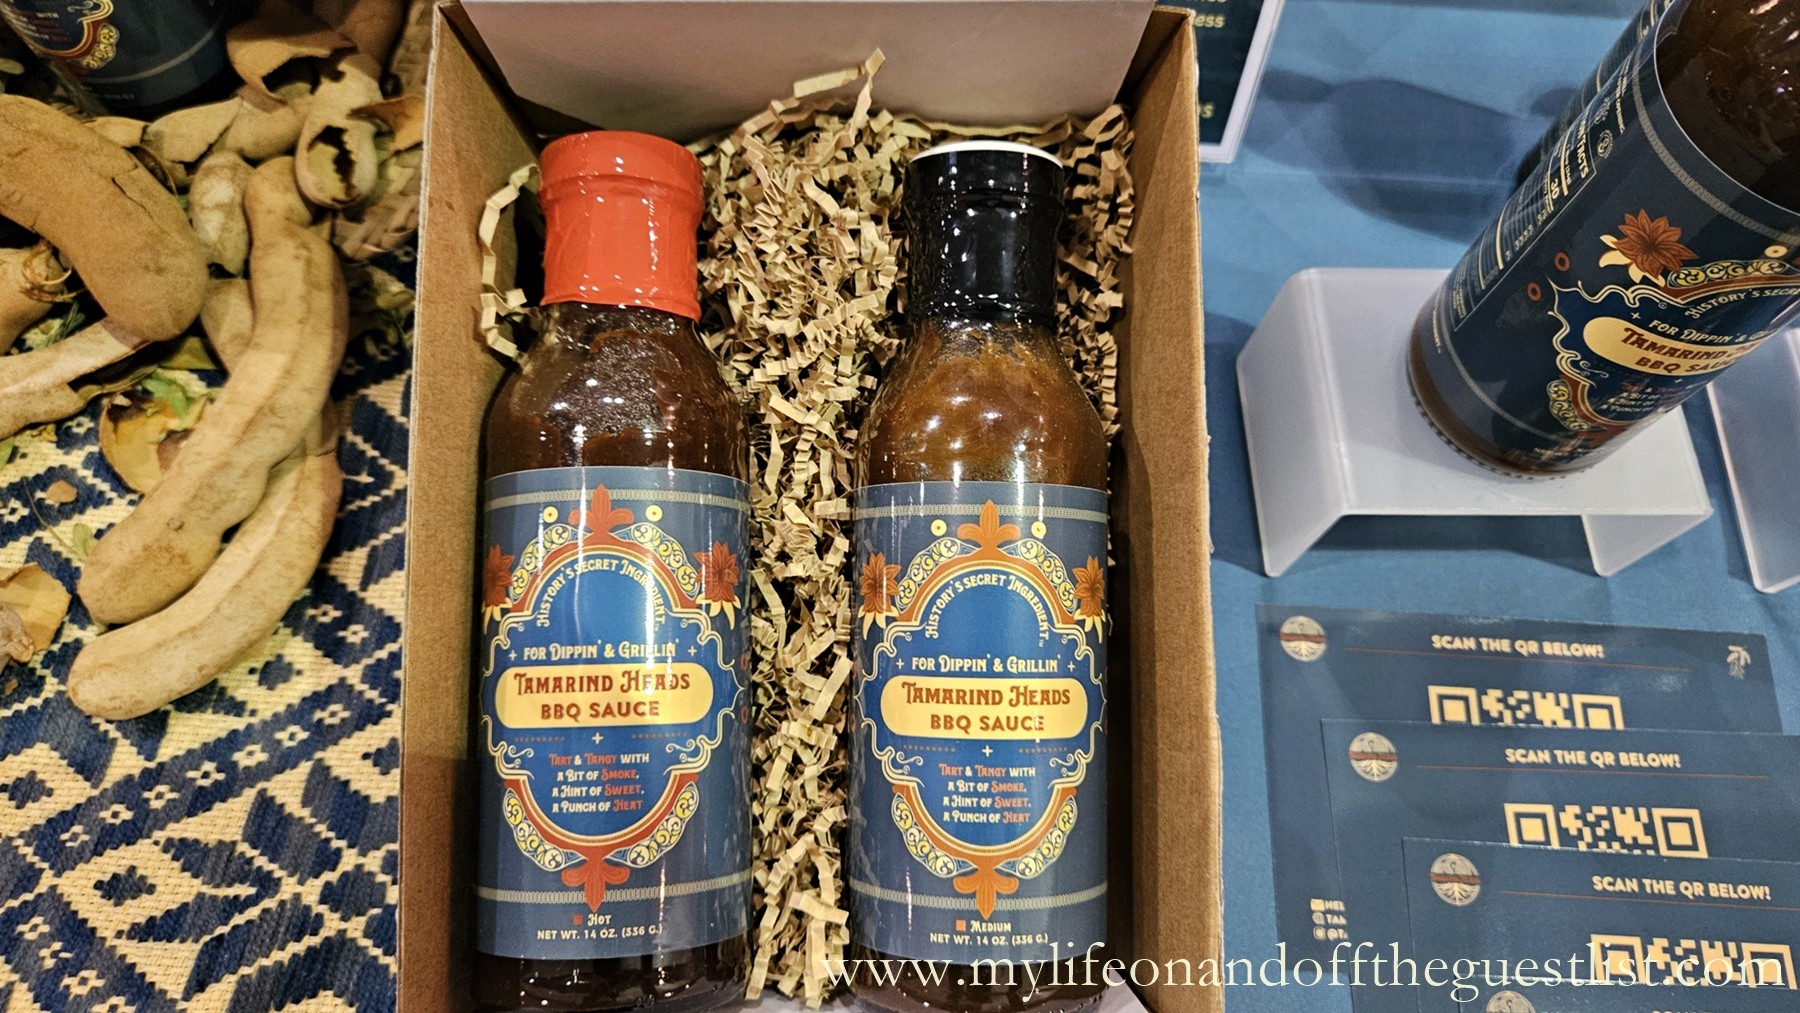 Tamarind Heads BBQ Sauce Wins Gold at the Summer Fancy Food Show